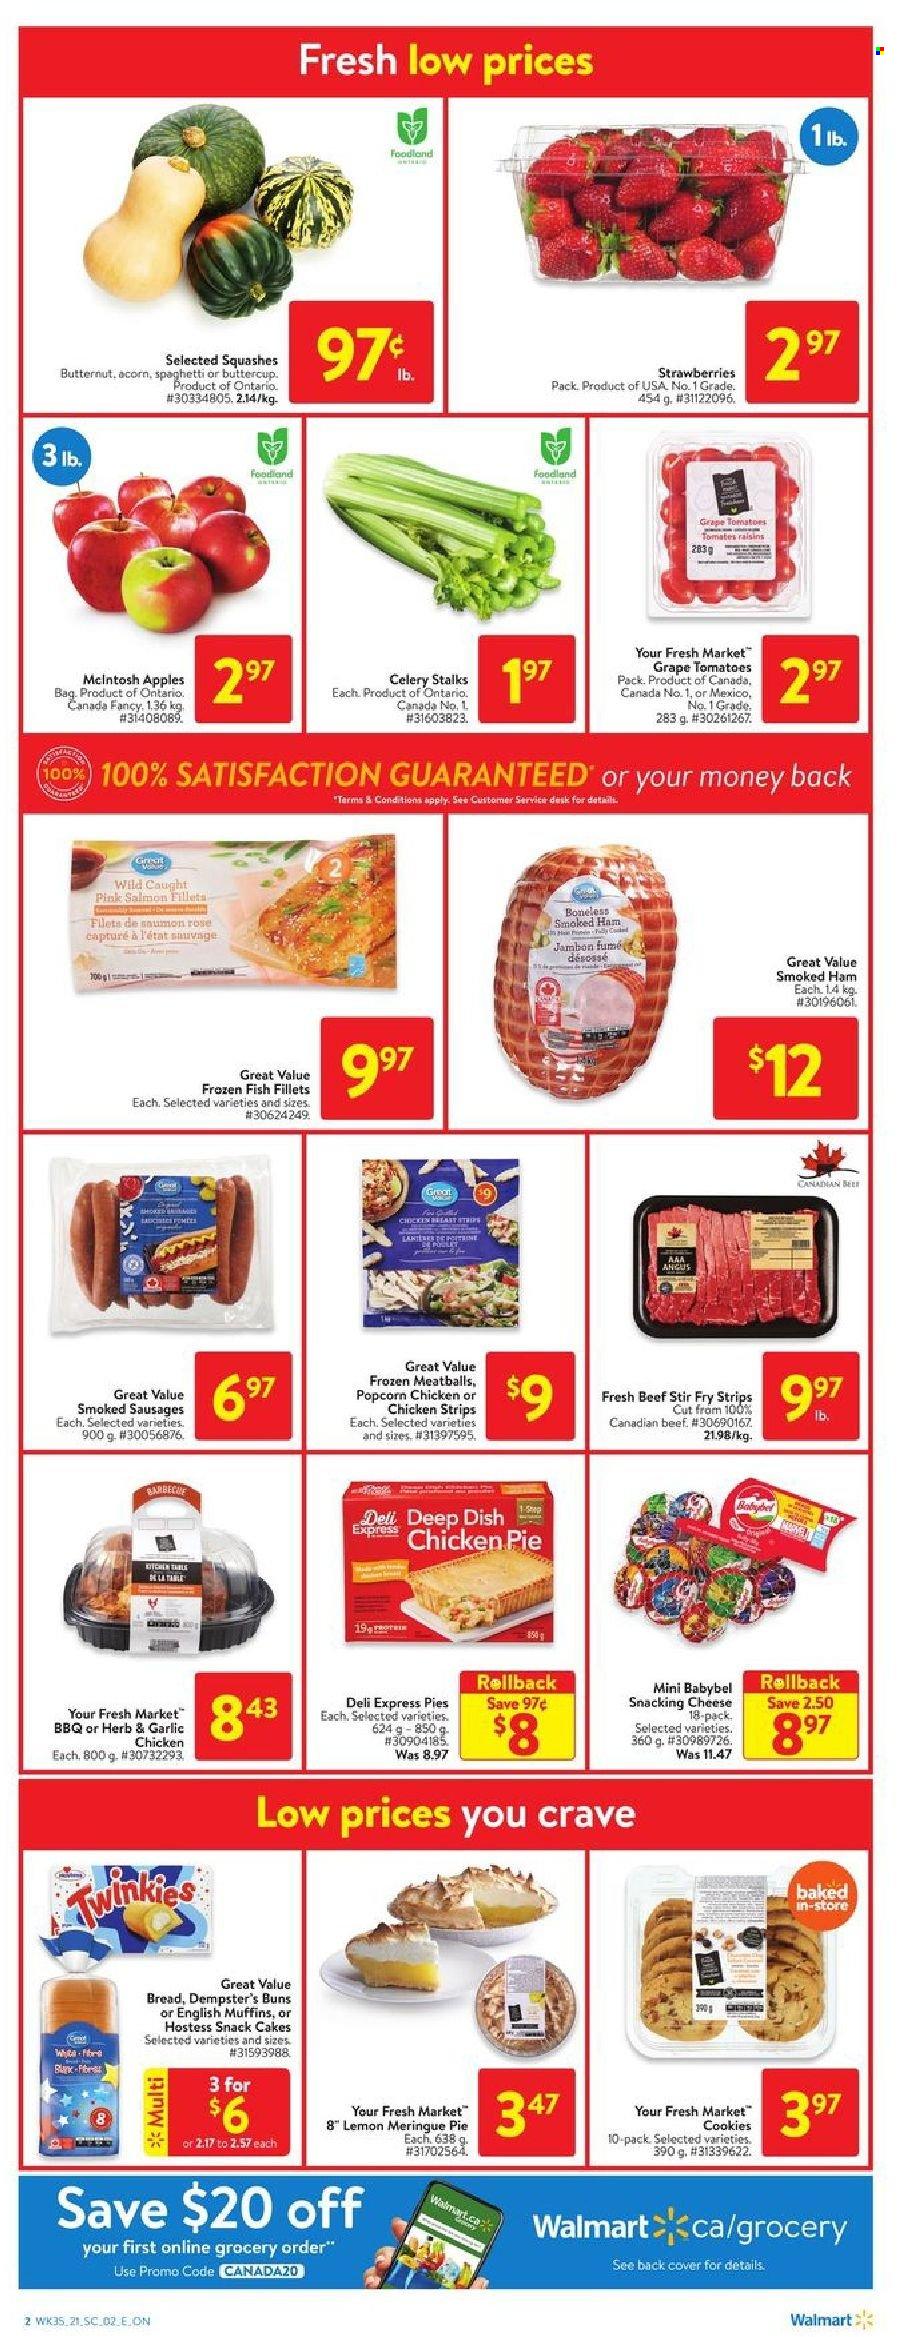 thumbnail - Walmart Flyer - September 23, 2021 - September 29, 2021 - Sales products - english muffins, cake, pie, buns, butternut squash, celery, tomatoes, sleeved celery, apples, strawberries, fish fillets, salmon, fish, spaghetti, meatballs, ham, smoked ham, sausage, cheese, Babybel, strips, chicken strips, cookies, snack, popcorn, dried fruit, rosé wine, stir fry strips, rose, raisins. Page 2.